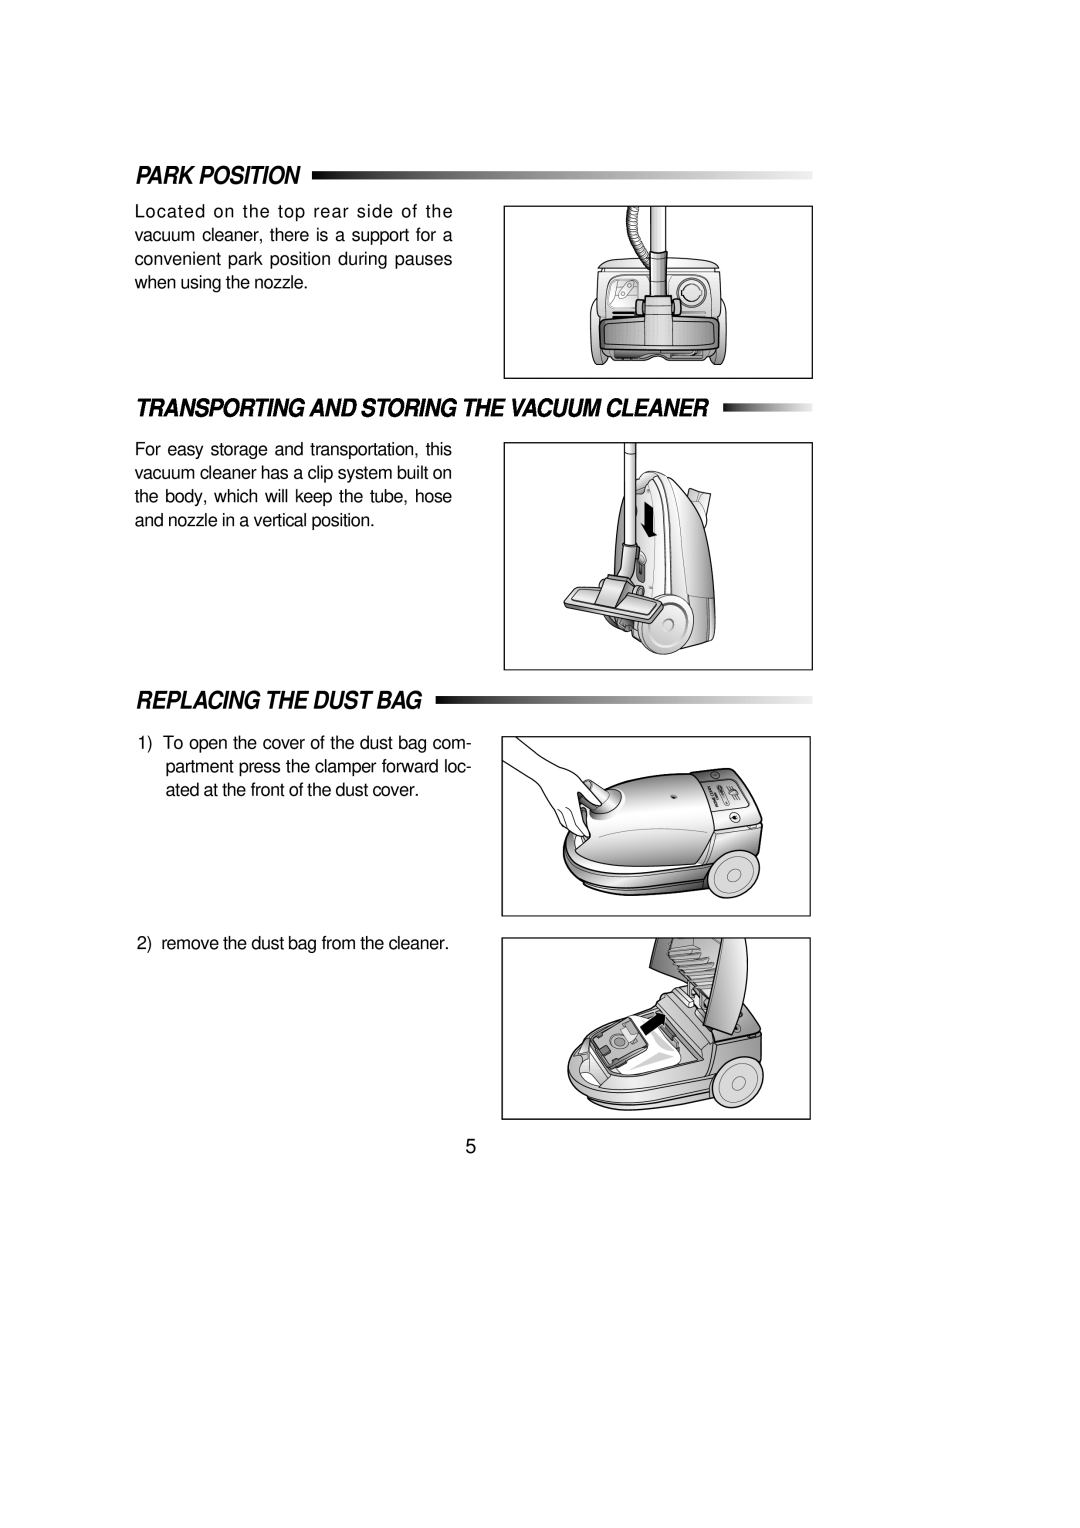 Samsung RC-5513V manual Park Position, Transporting And Storing The Vacuum Cleaner, Replacing The Dust Bag 